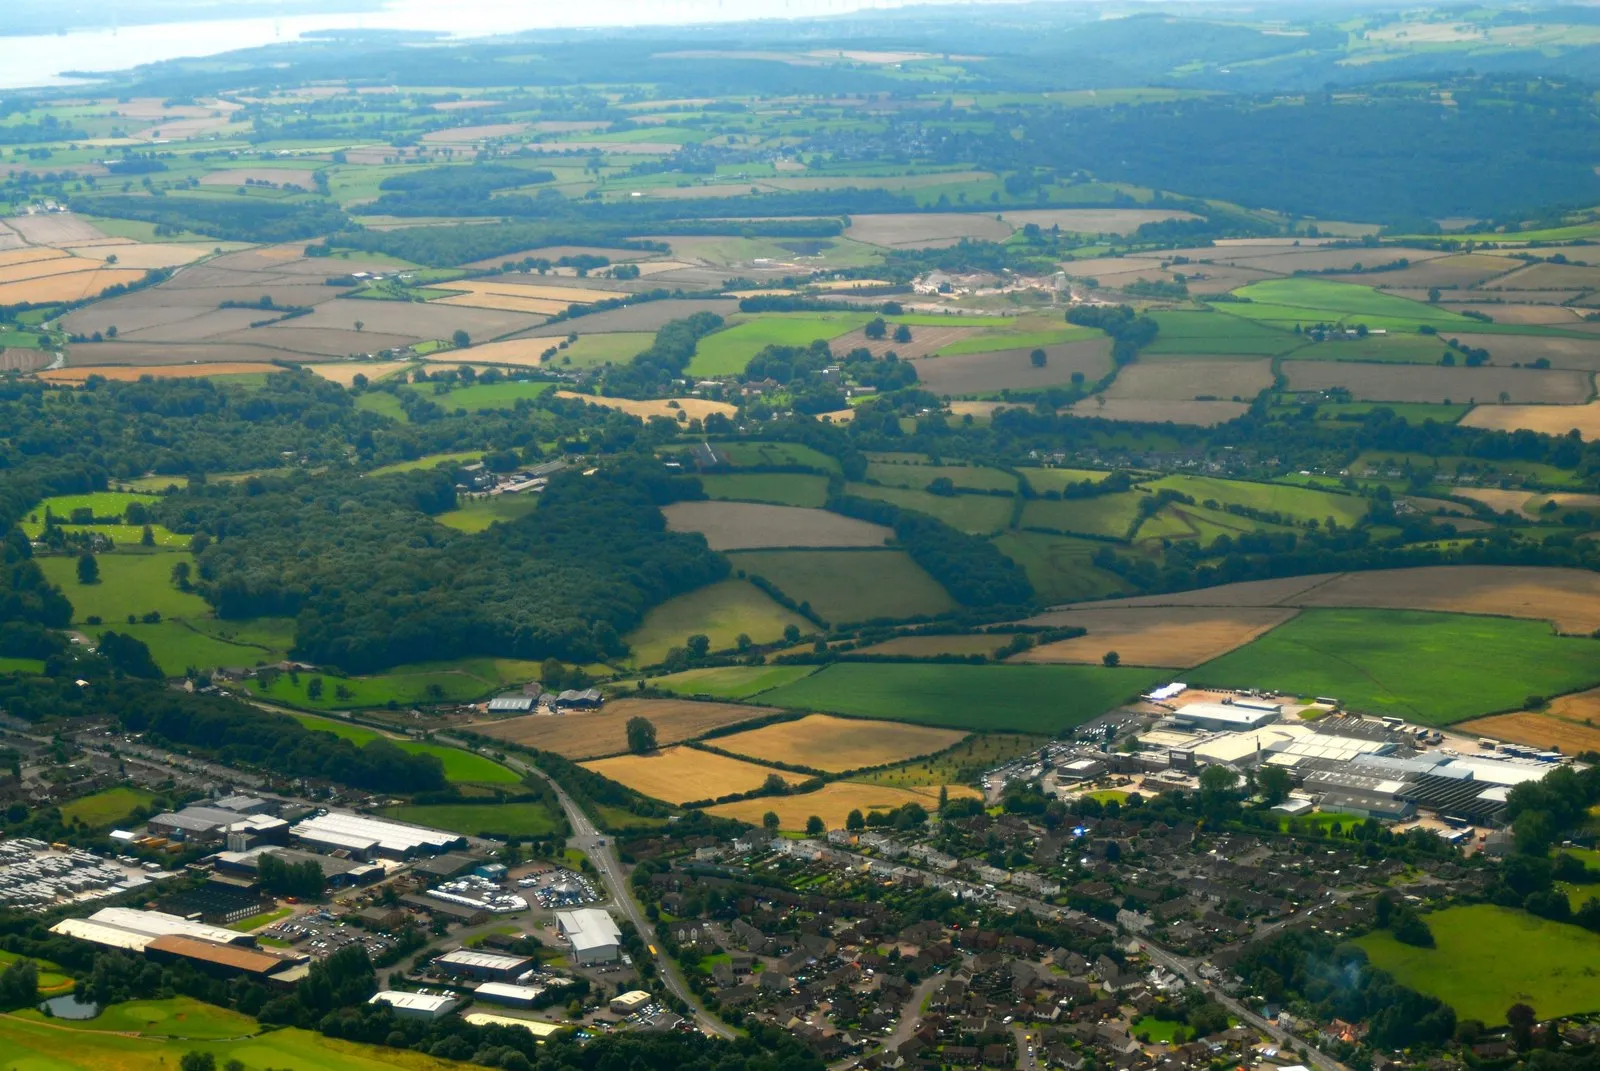 Image of Gloucestershire, Wiltshire and Bristol/Bath area